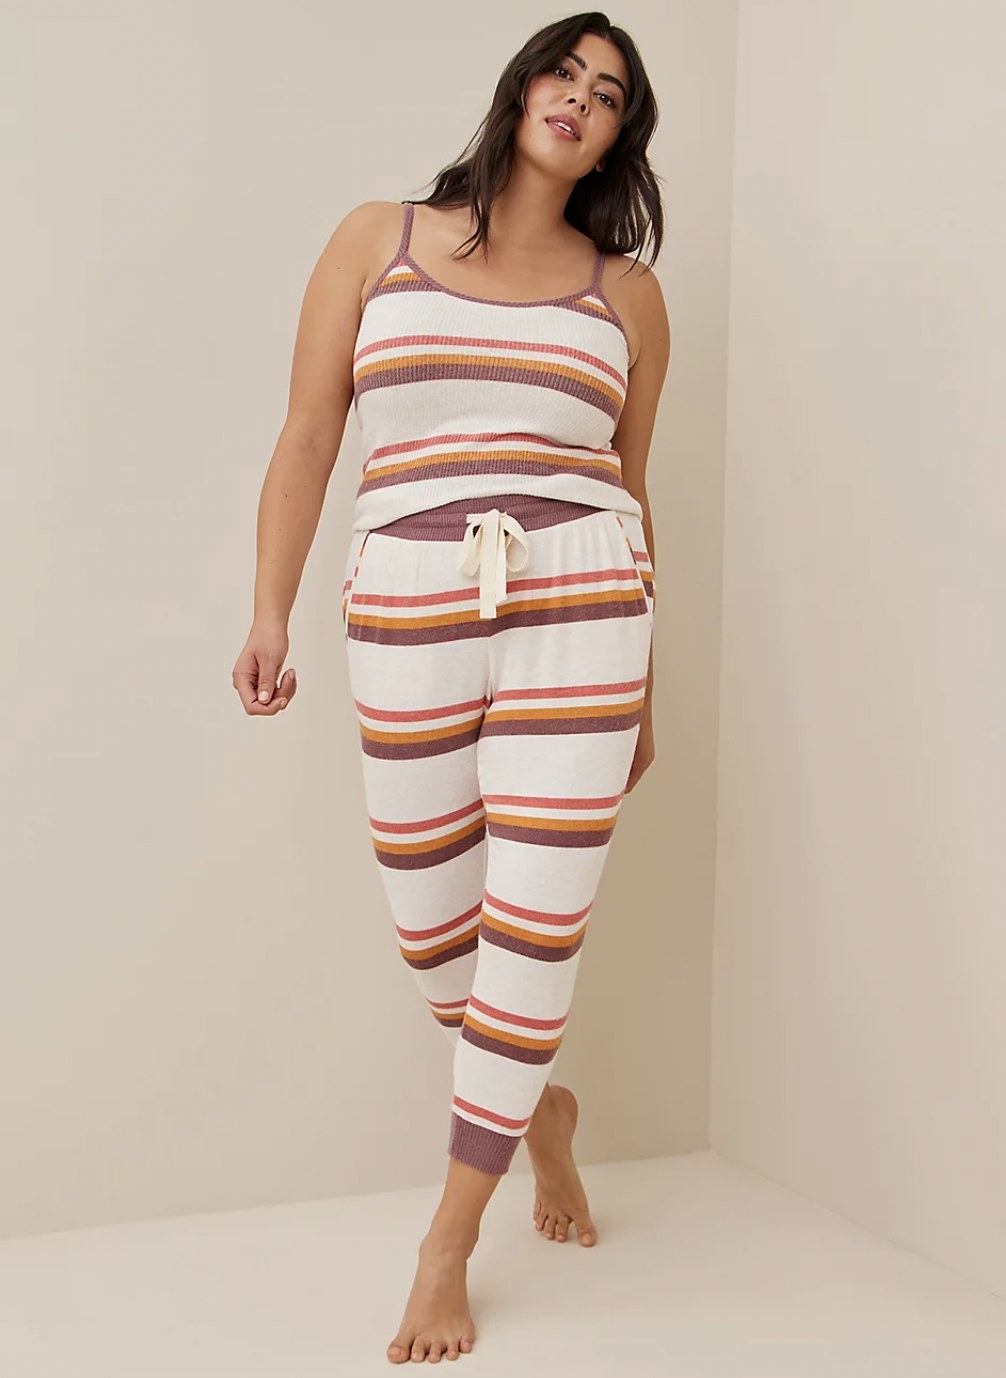 Model in the striped joggers